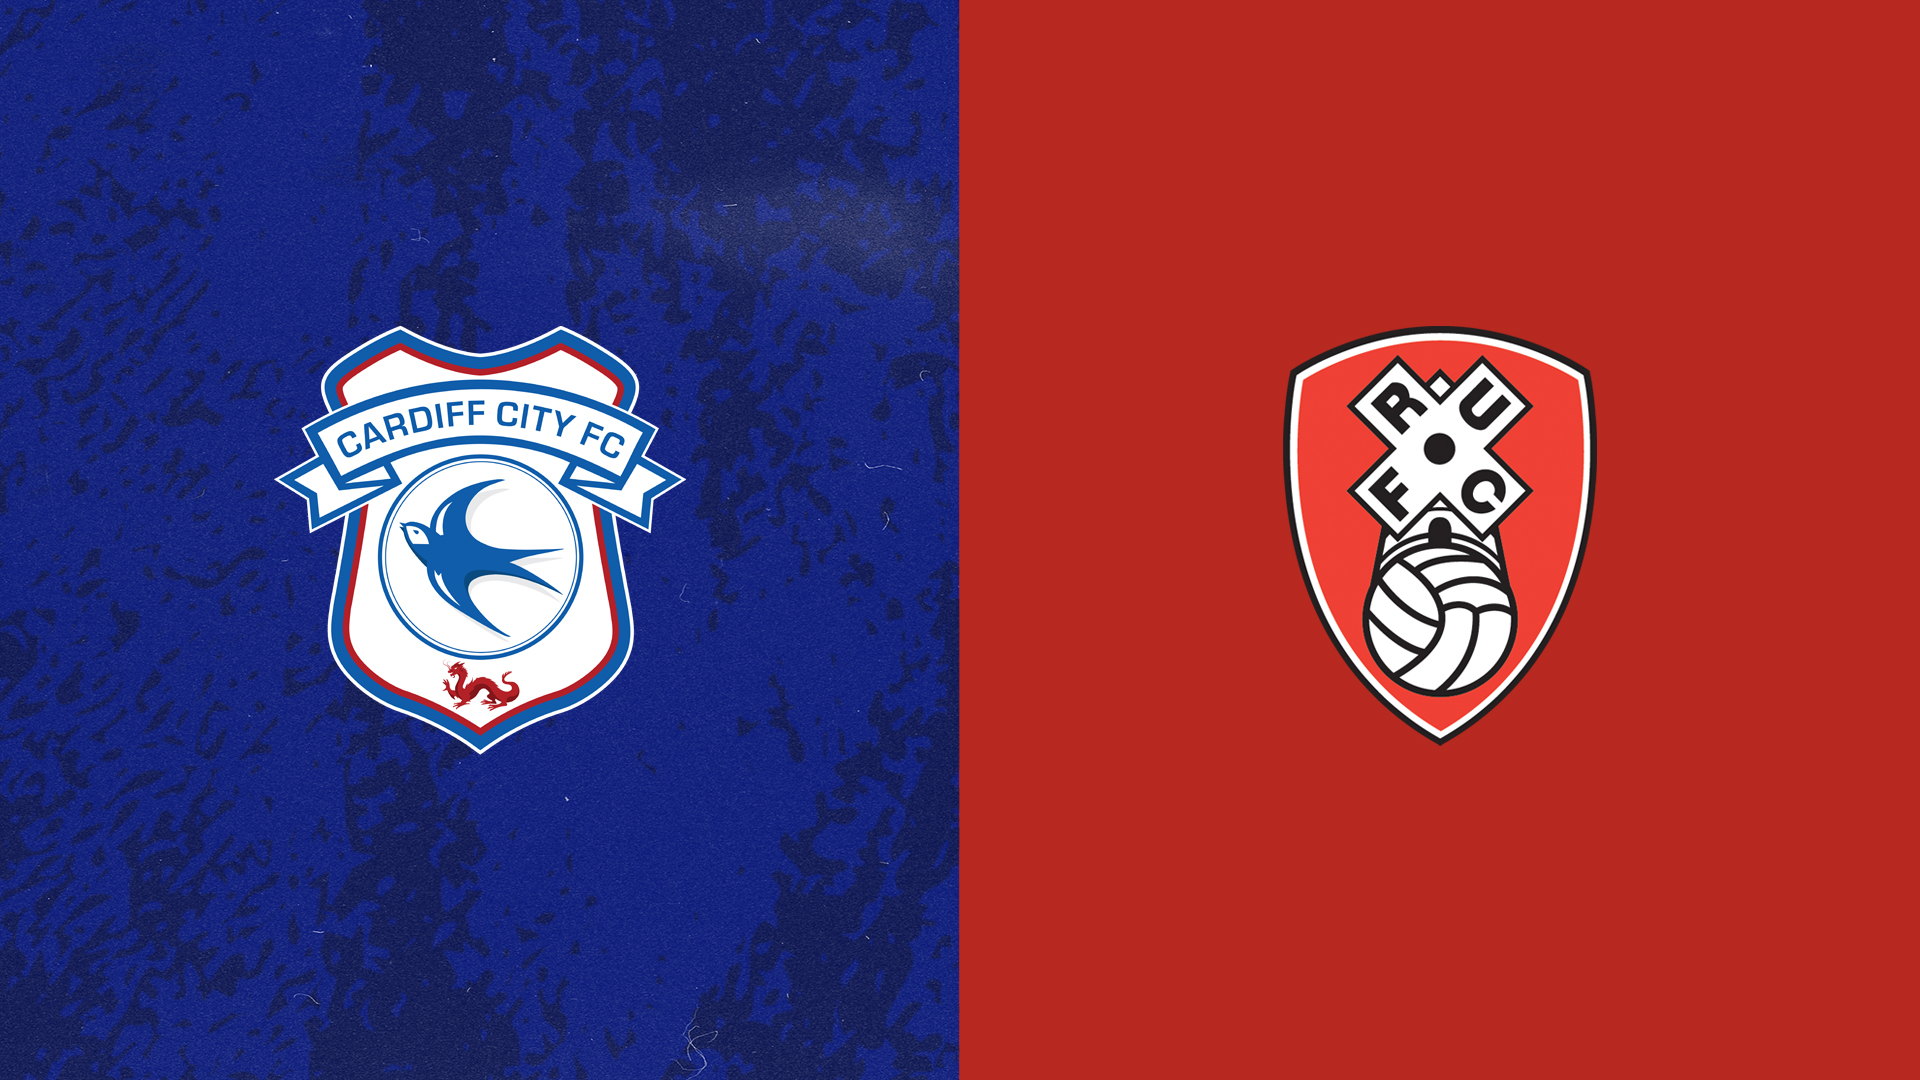 Millwall v Rotherham United - Match Preview